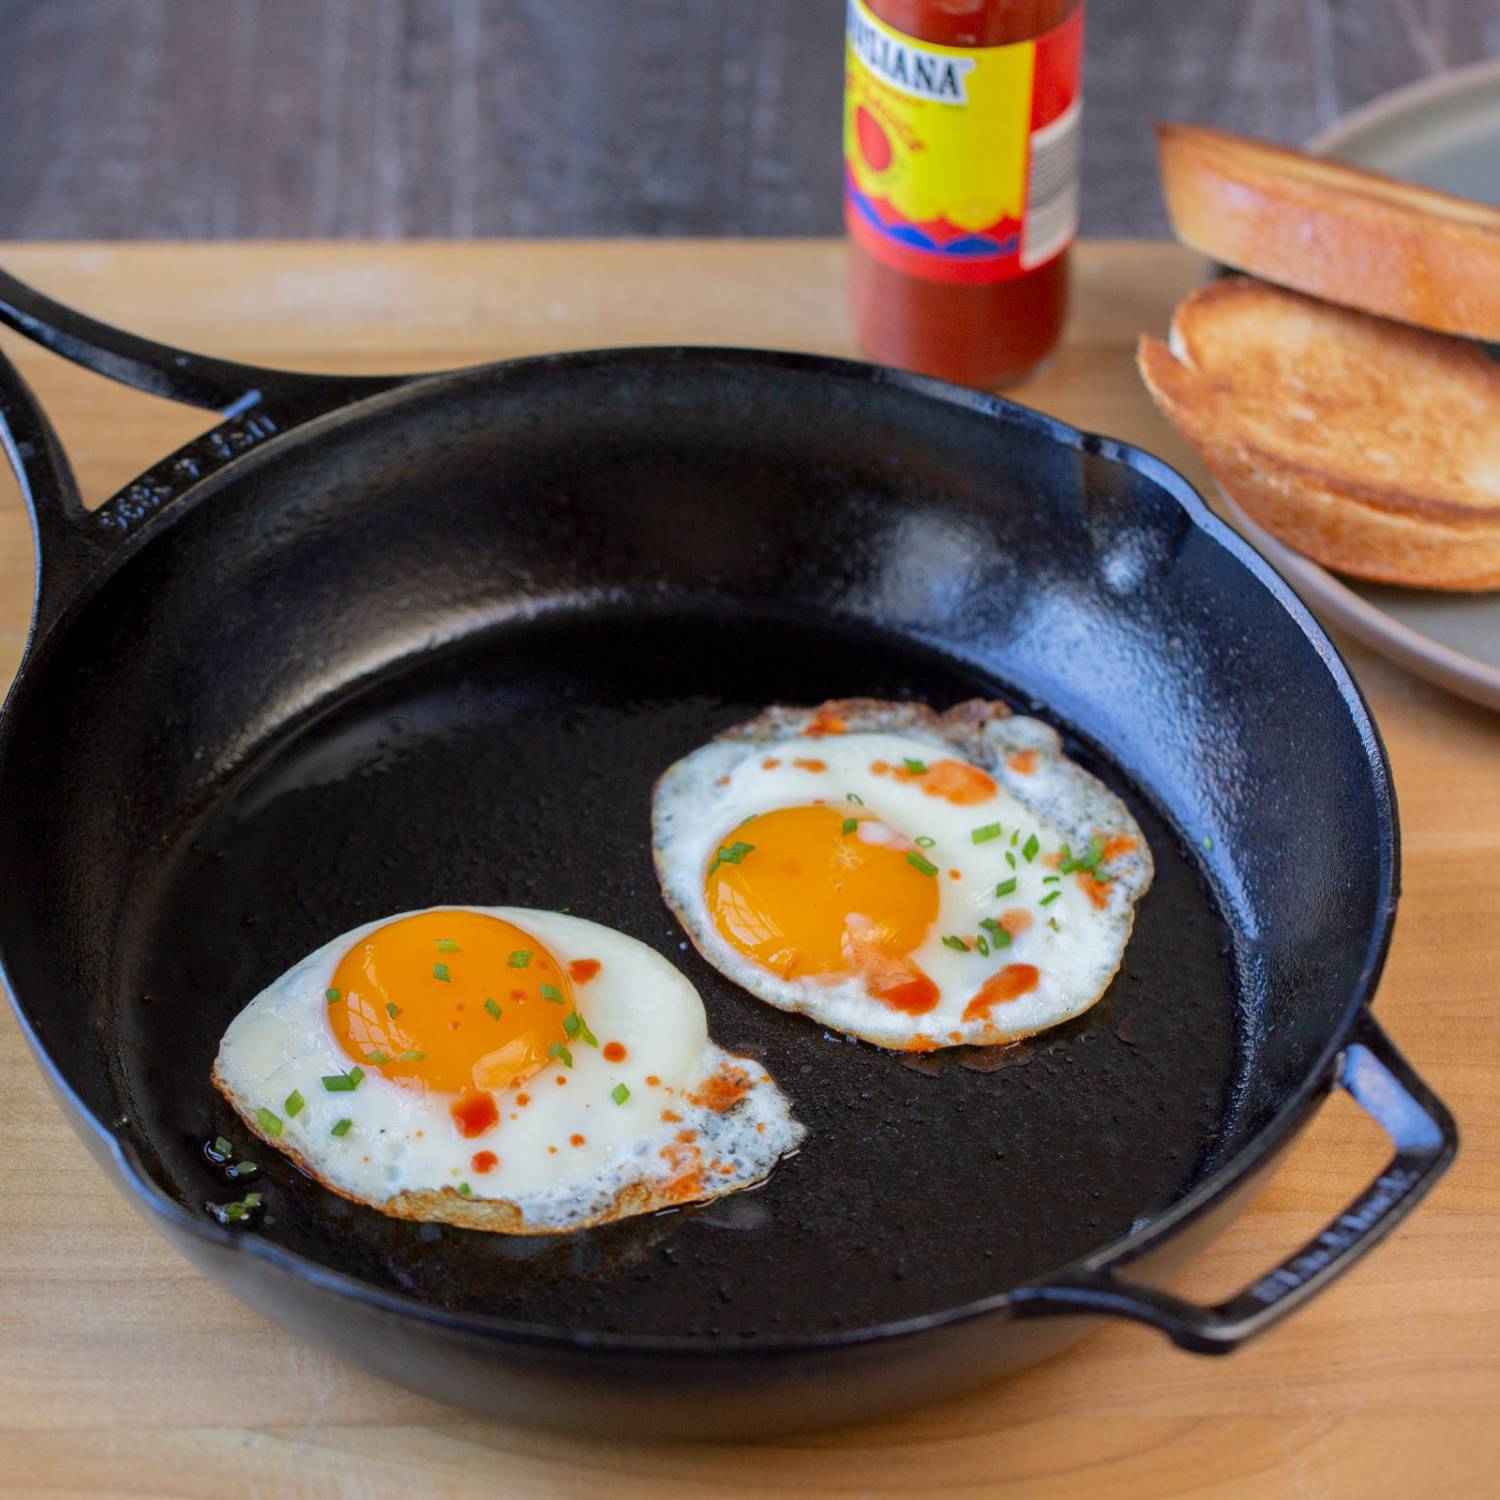 Unboxing and Cooking with the Blacklock Cast Iron Skillet 